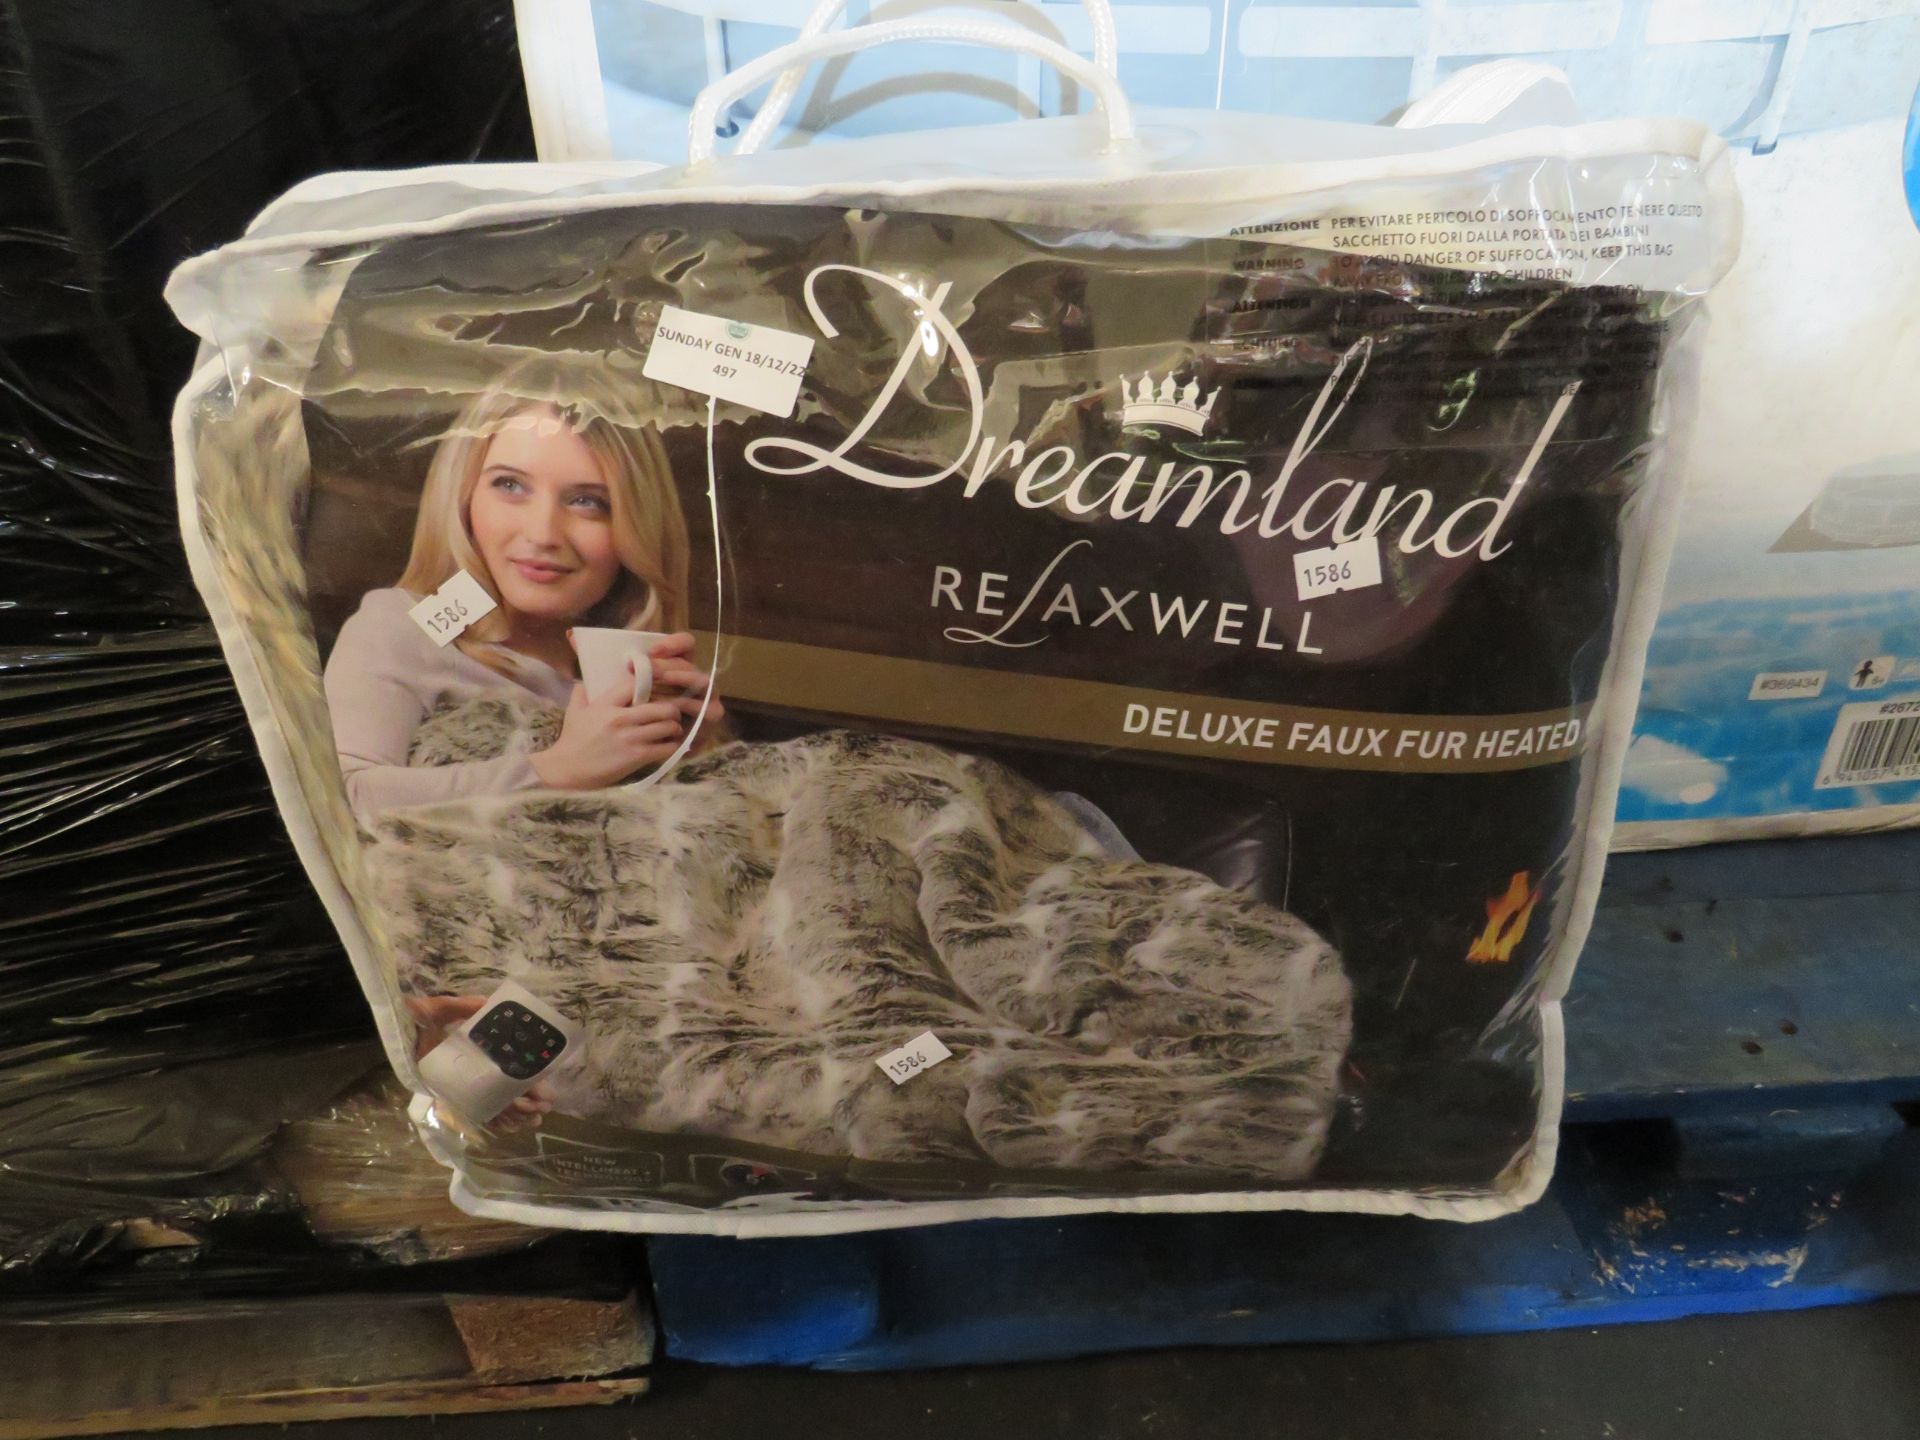 Dreamland - Deluxe Faux Fur Heated Blanket - Untested & Packaged.